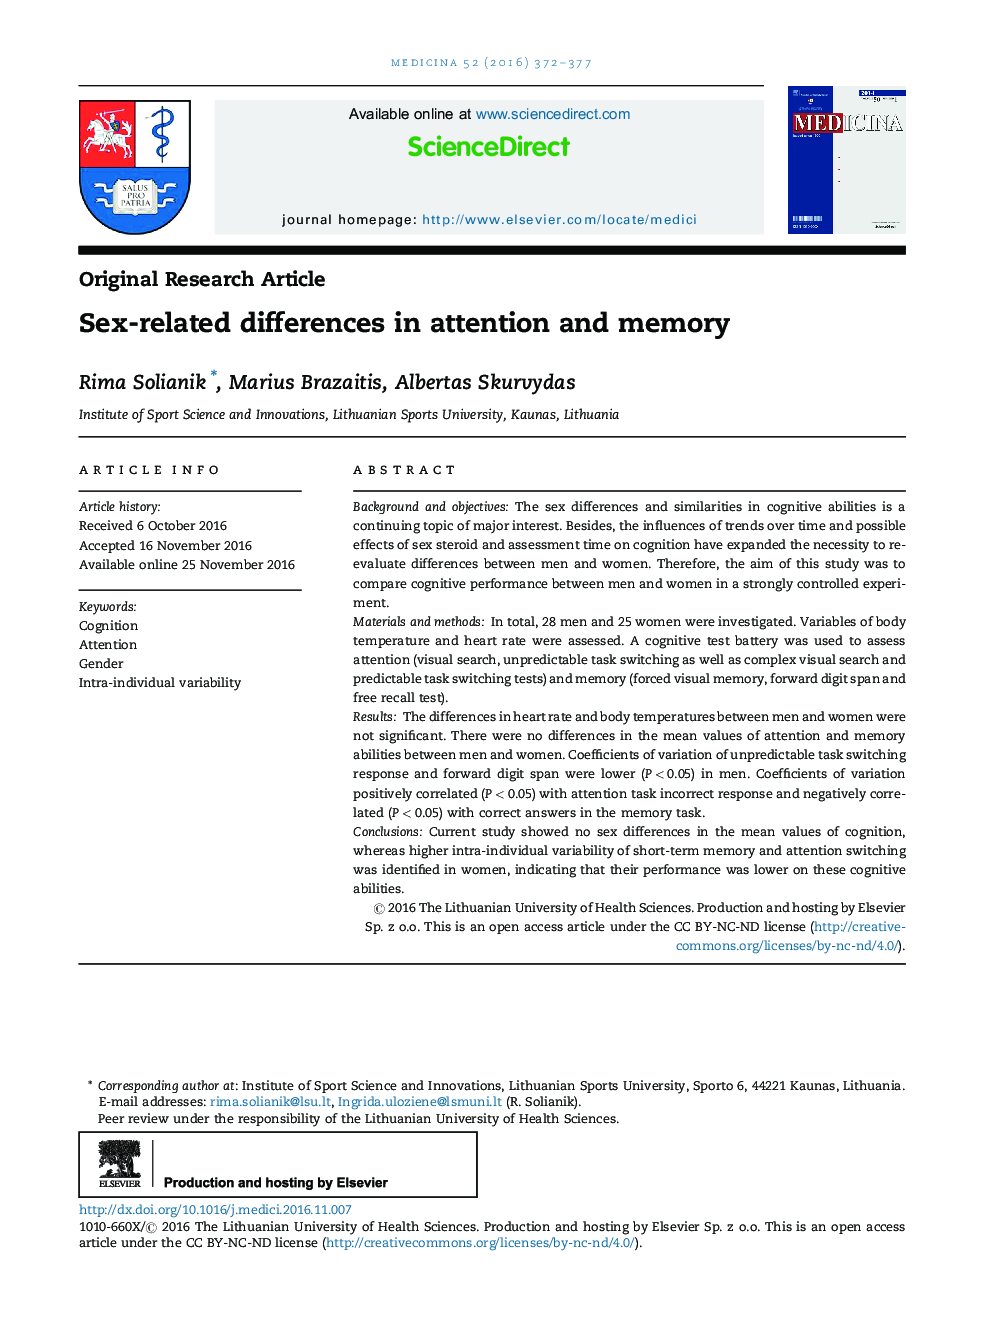 Sex-related differences in attention and memory